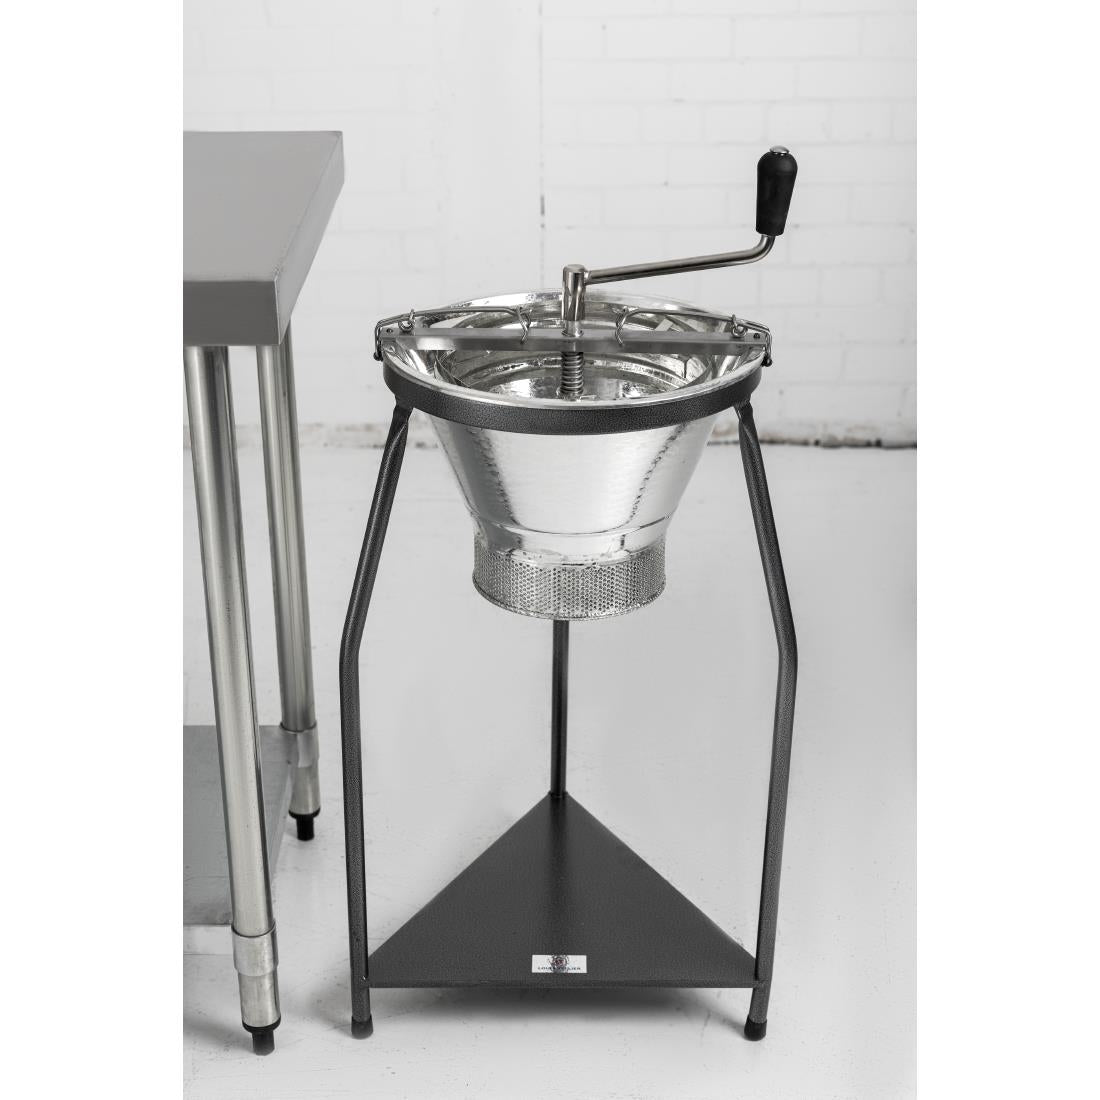 J426 Tellier Triturator And Stand